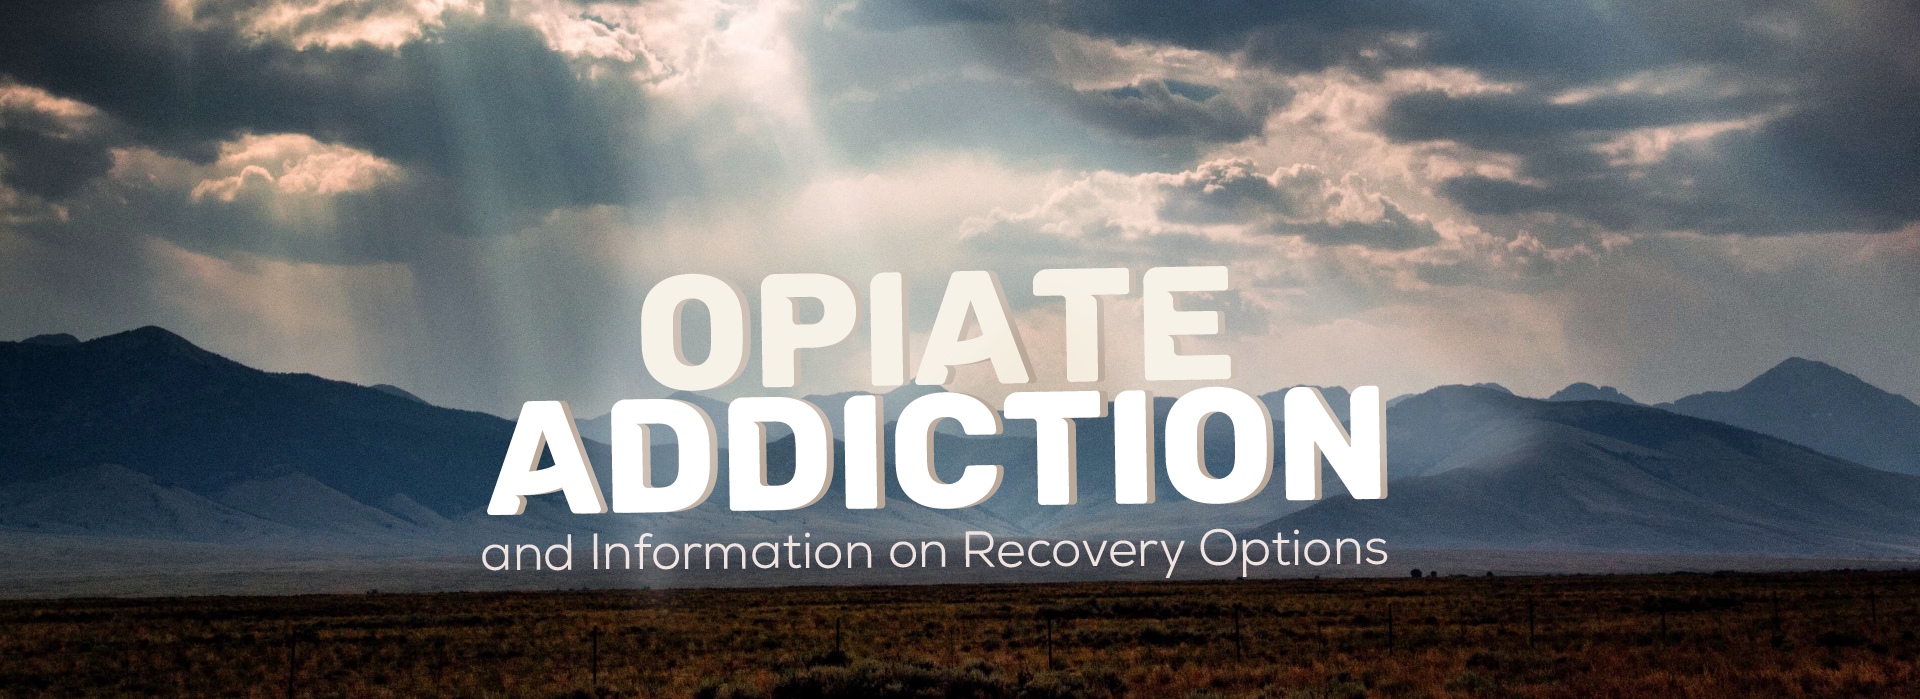 Opiate addiction and information on recovery options